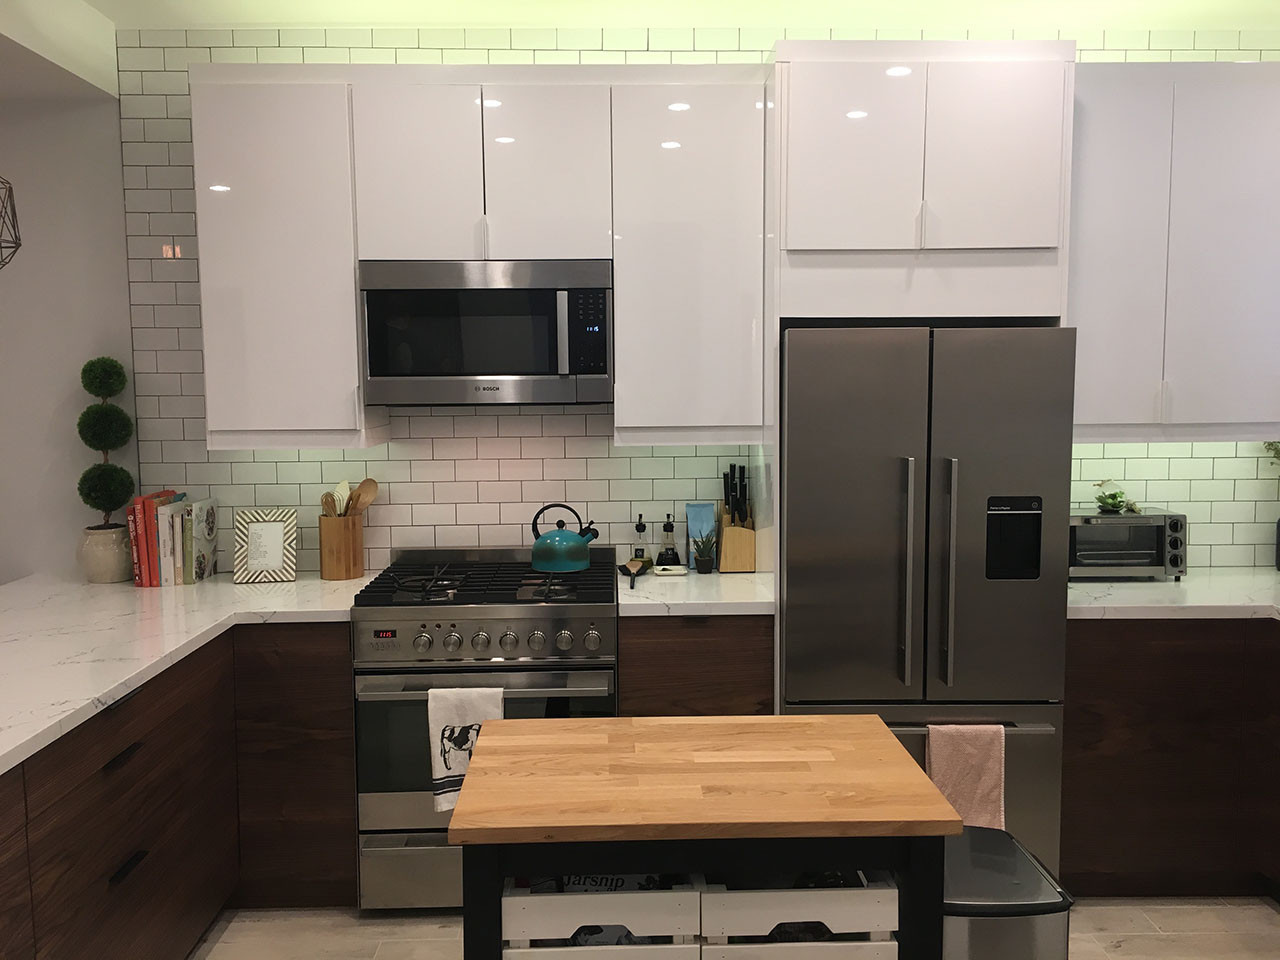 Modern Kitchen Cabinets Ikea
 A Small IKEA Kitchen Let’s Get Vertical Vertical